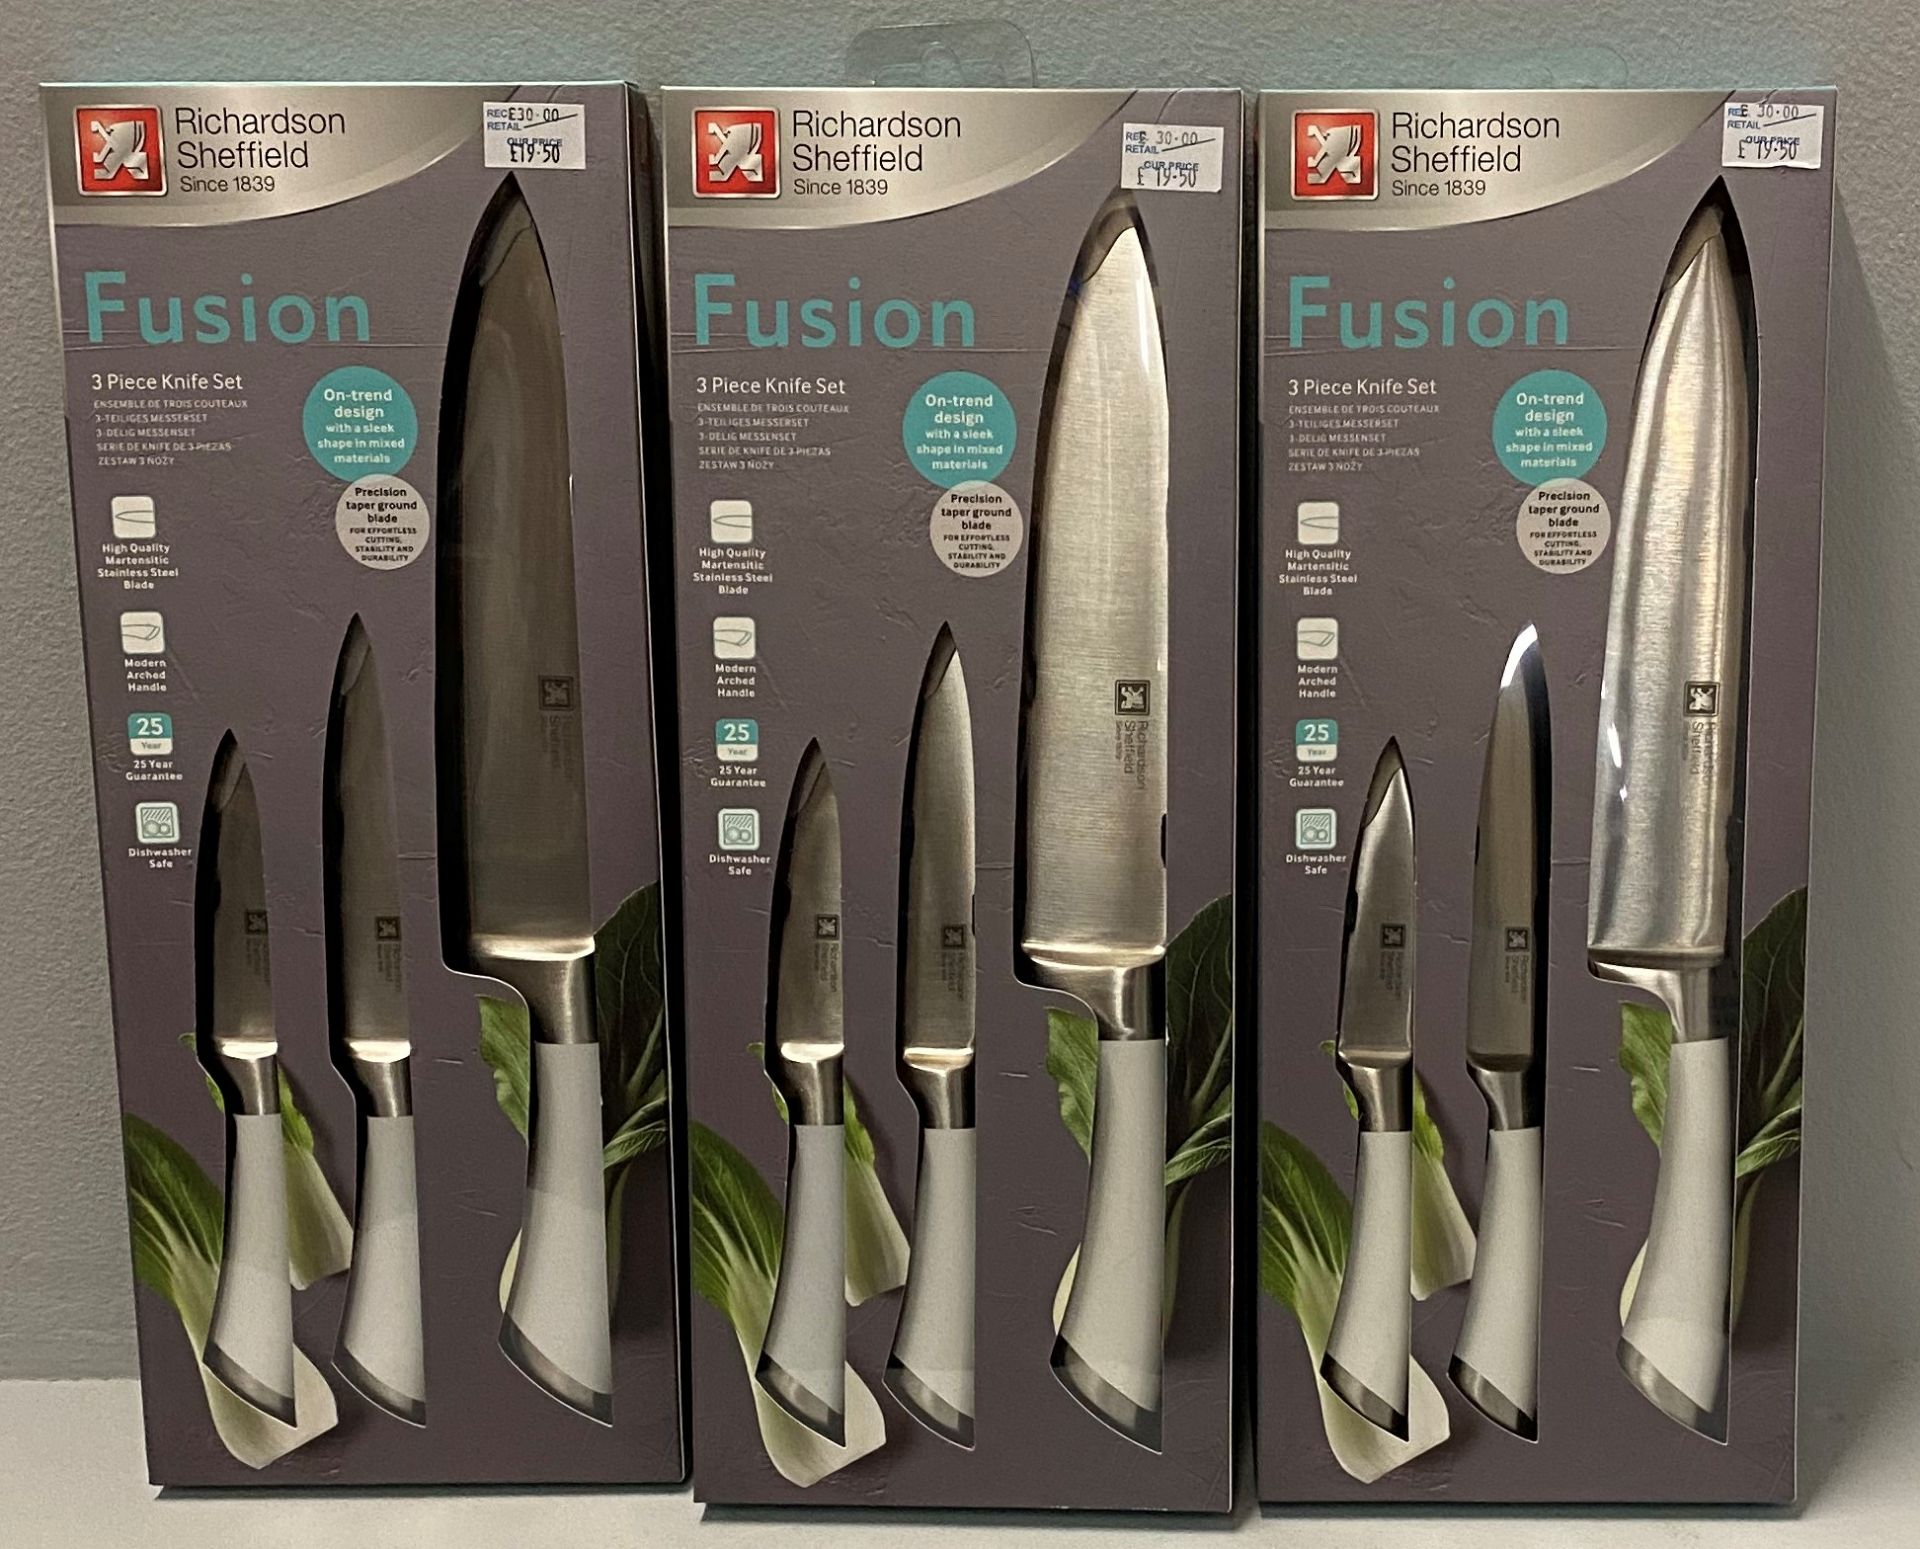 3 x Richardson Sheffield Fusion 3 piece stainless steel knife sets RRP £30.